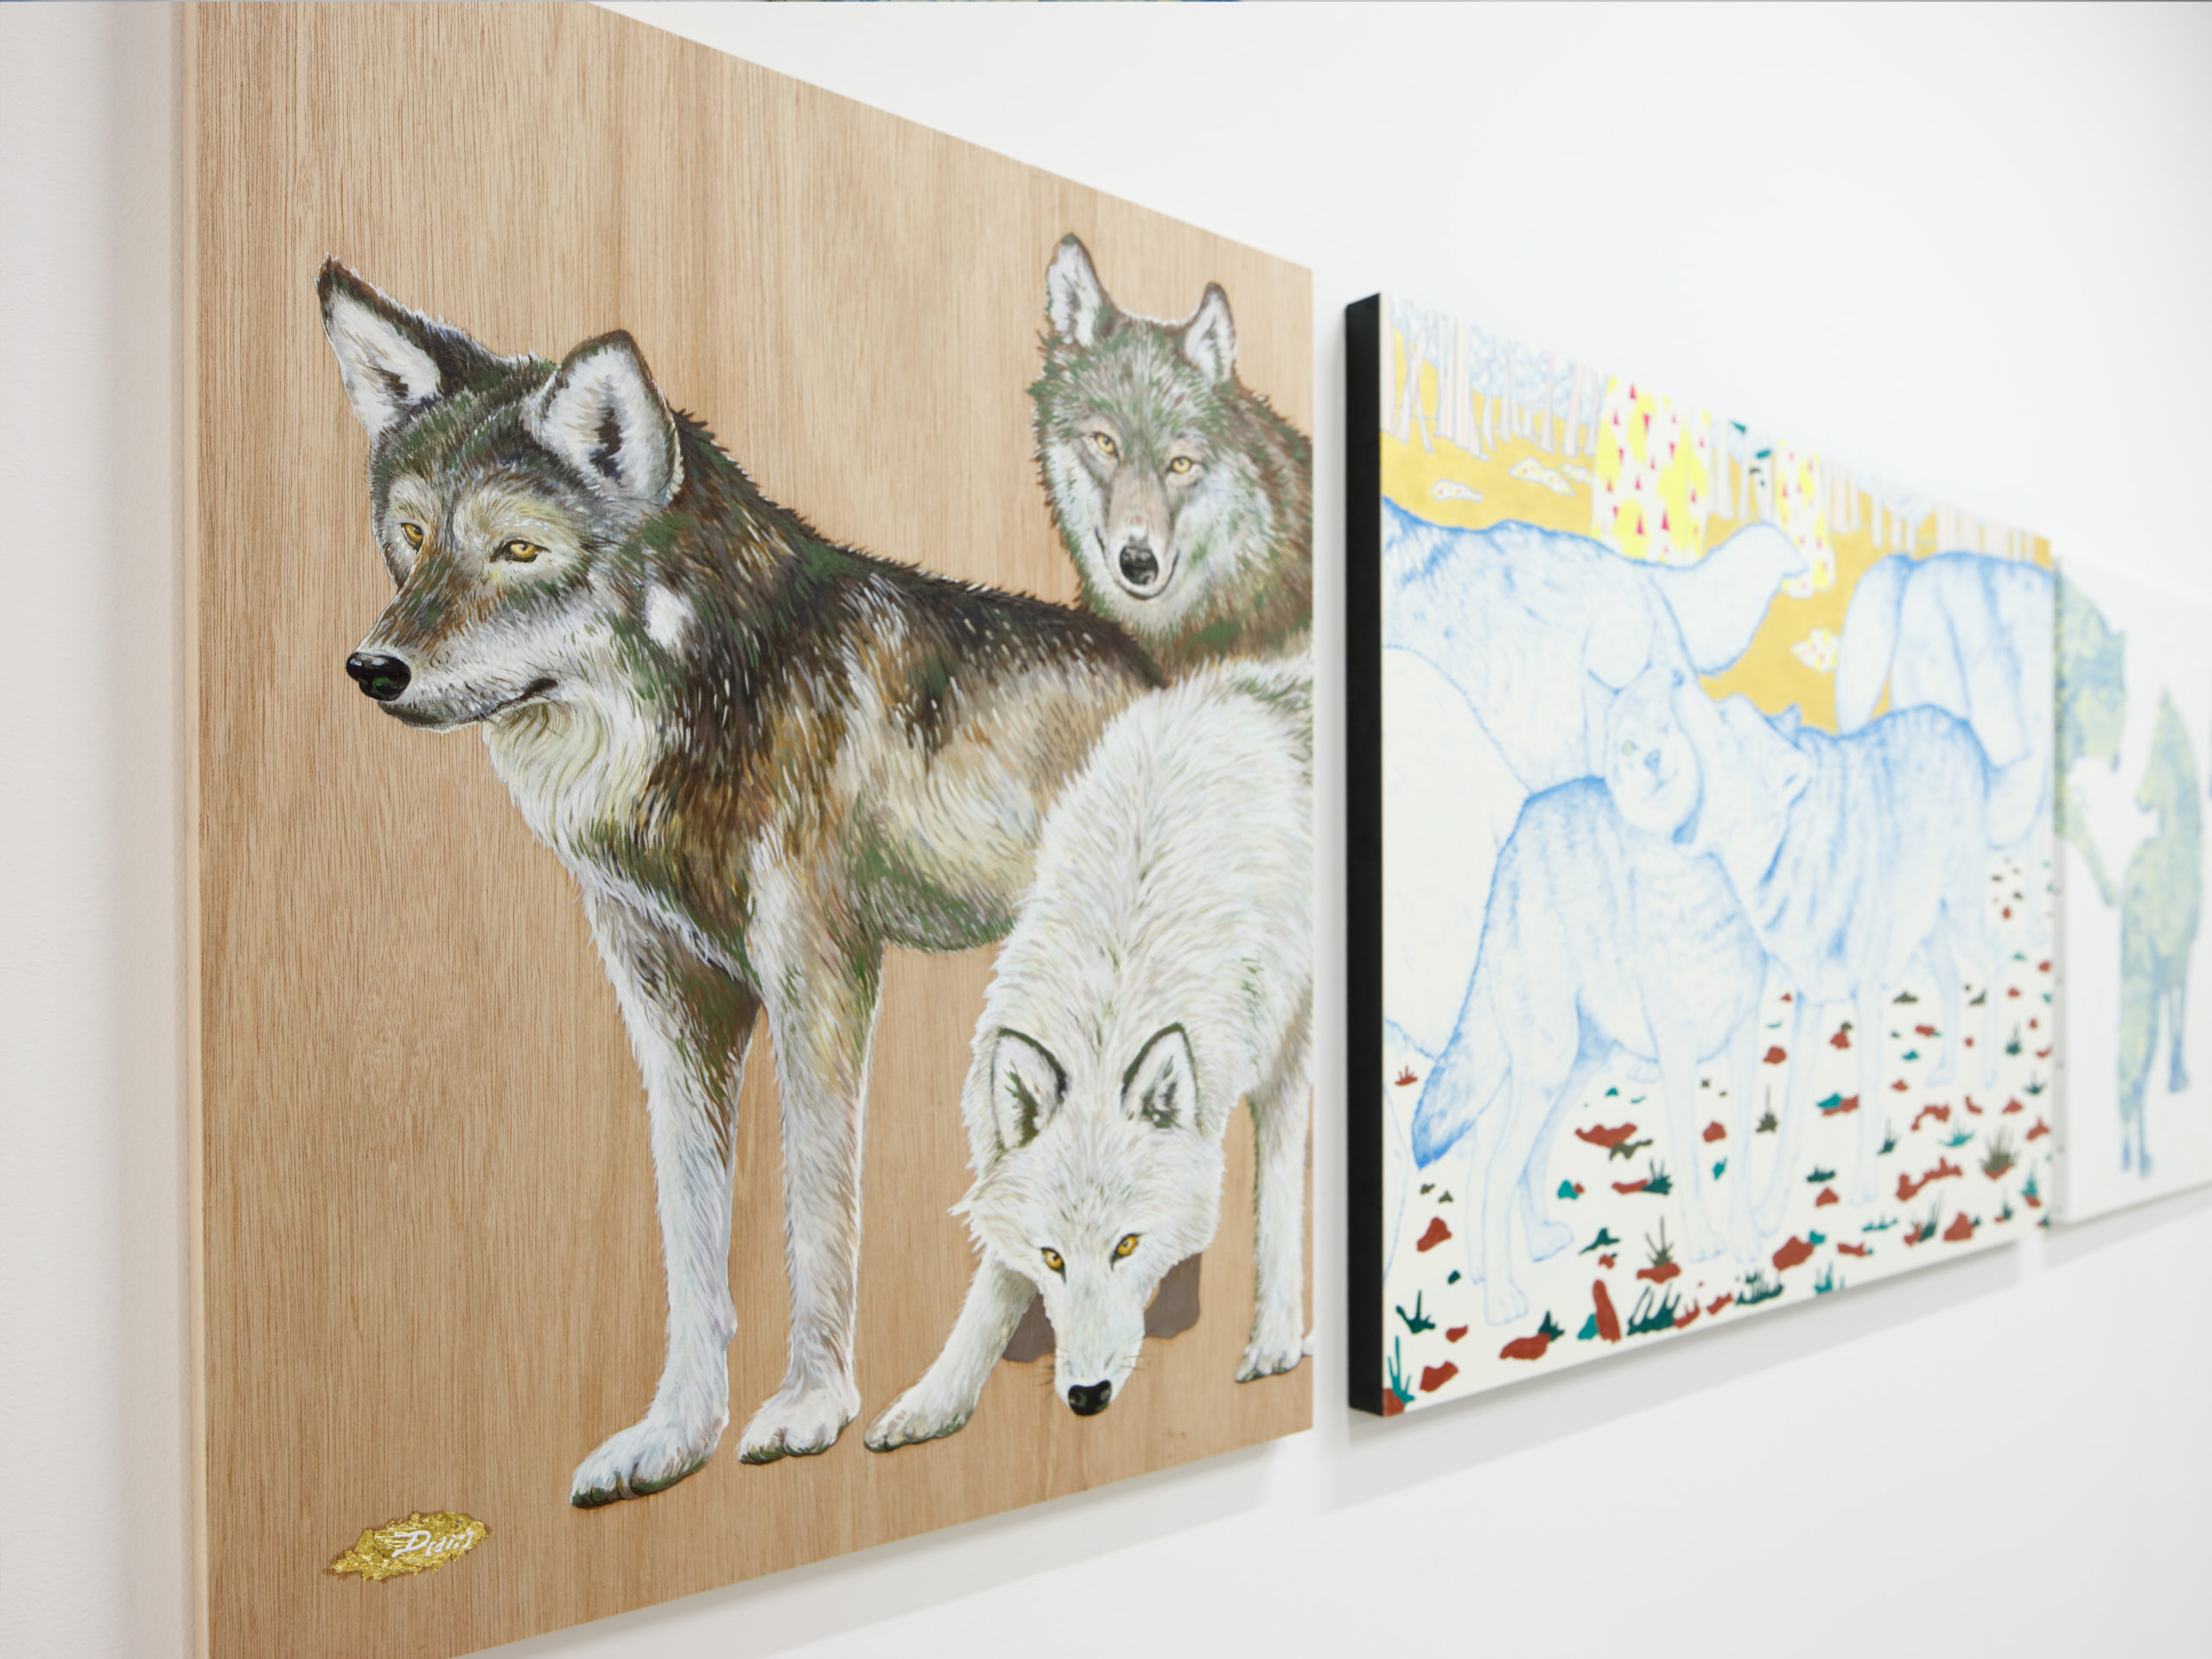 The wolves of 4th dimention／ 2922✖️730mm／for solo show『Crystallized Points of View』at hpgrp gallery Tokyo Aoyama